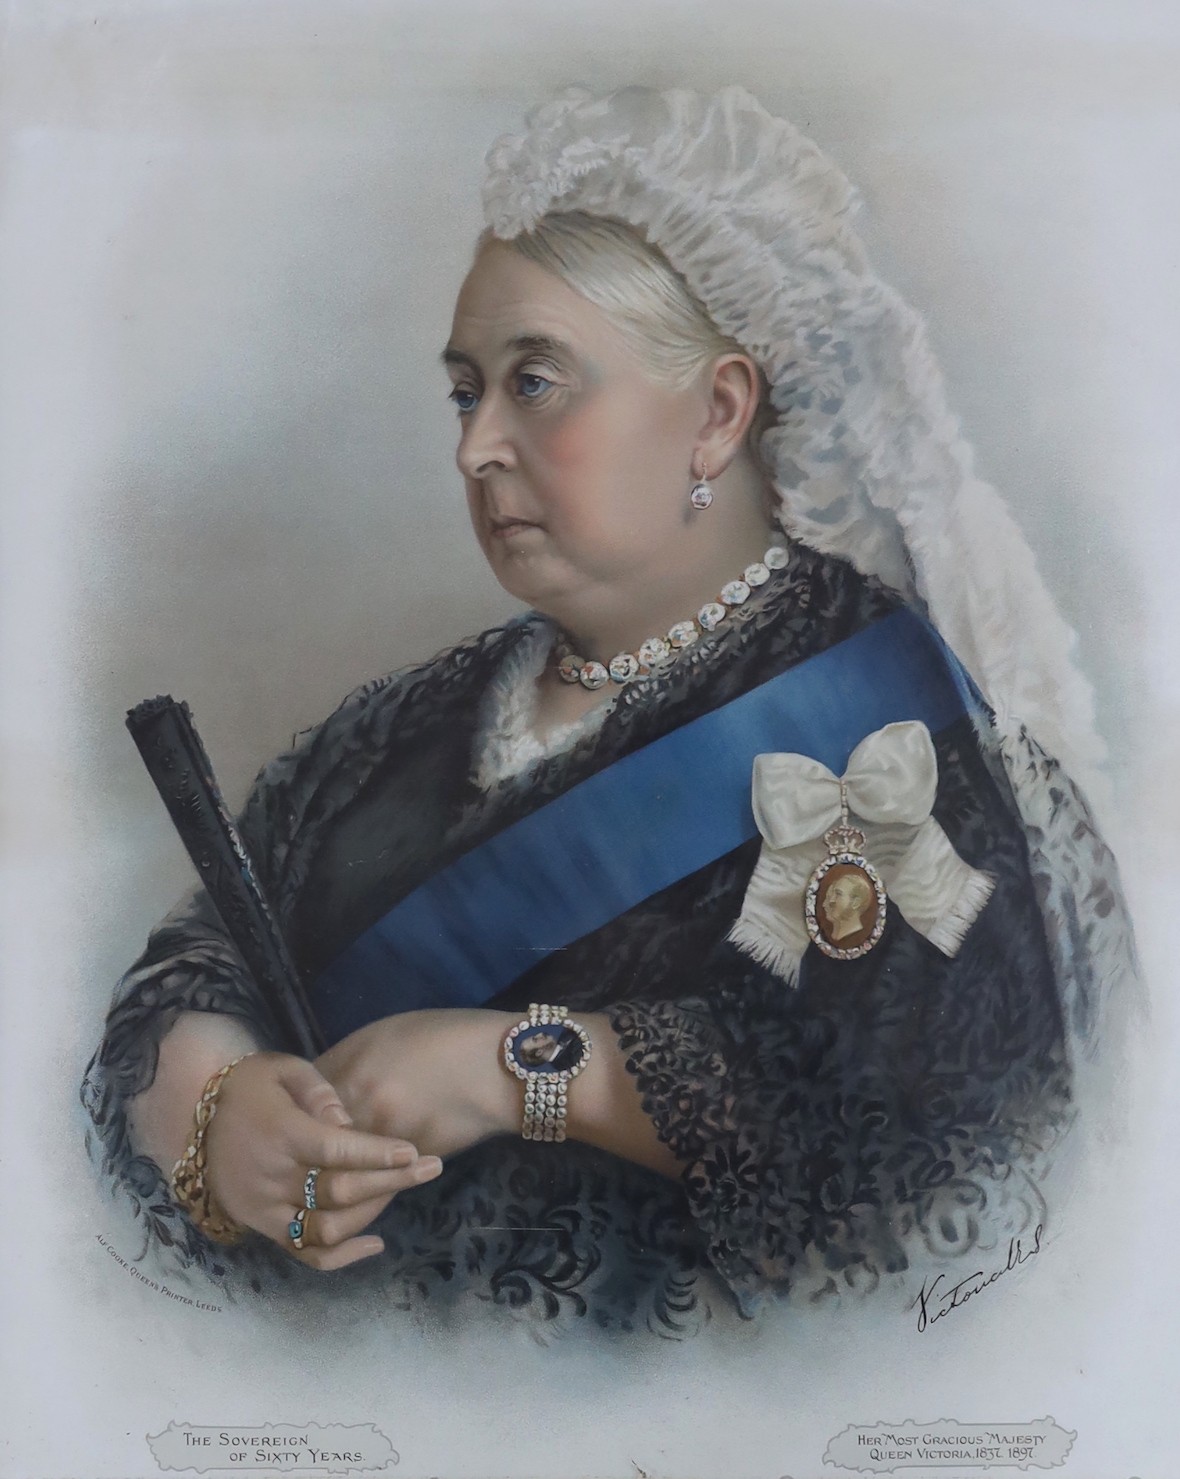 Alfred Cooke publ., chromolithograph, Portrait of Queen Victoria, the Sovereign of 60 years, 60 x 49cm, another chromolithograph, The late Majesty, Queen Victoria, 84 x 74cm, and an 1887 Jubilee portrait